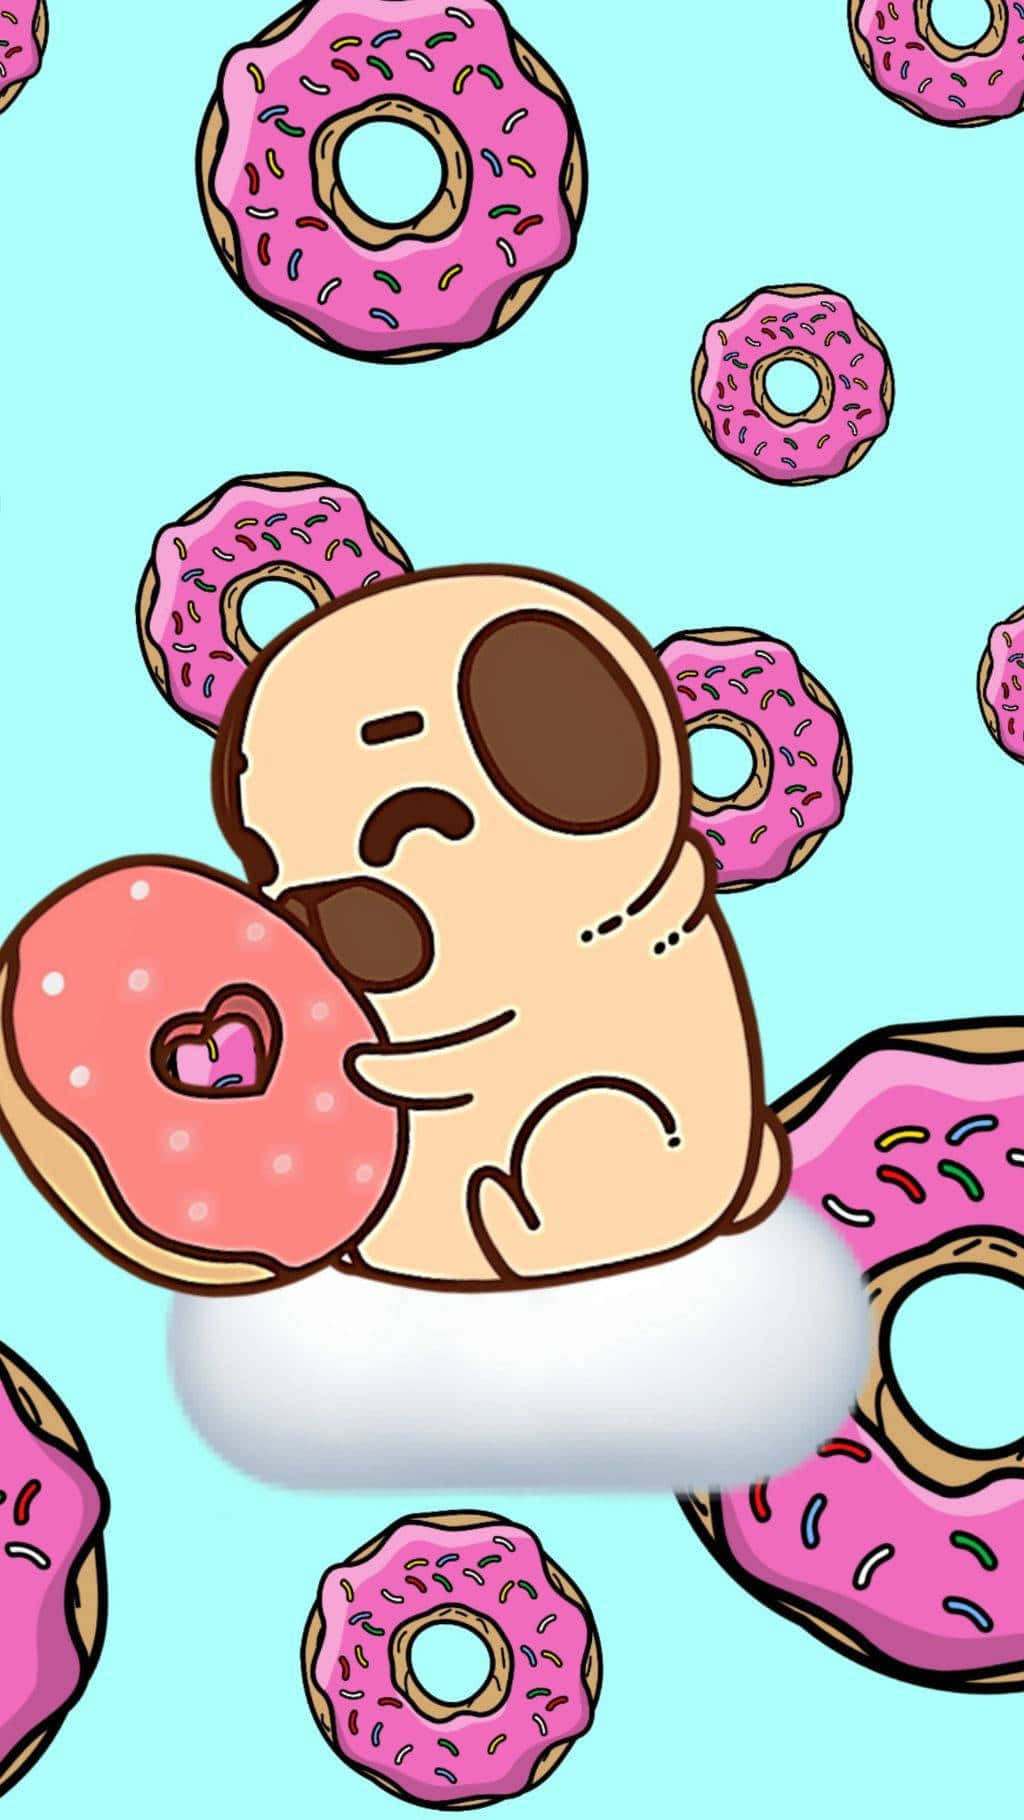 Adorable Donut with a Smile Wallpaper